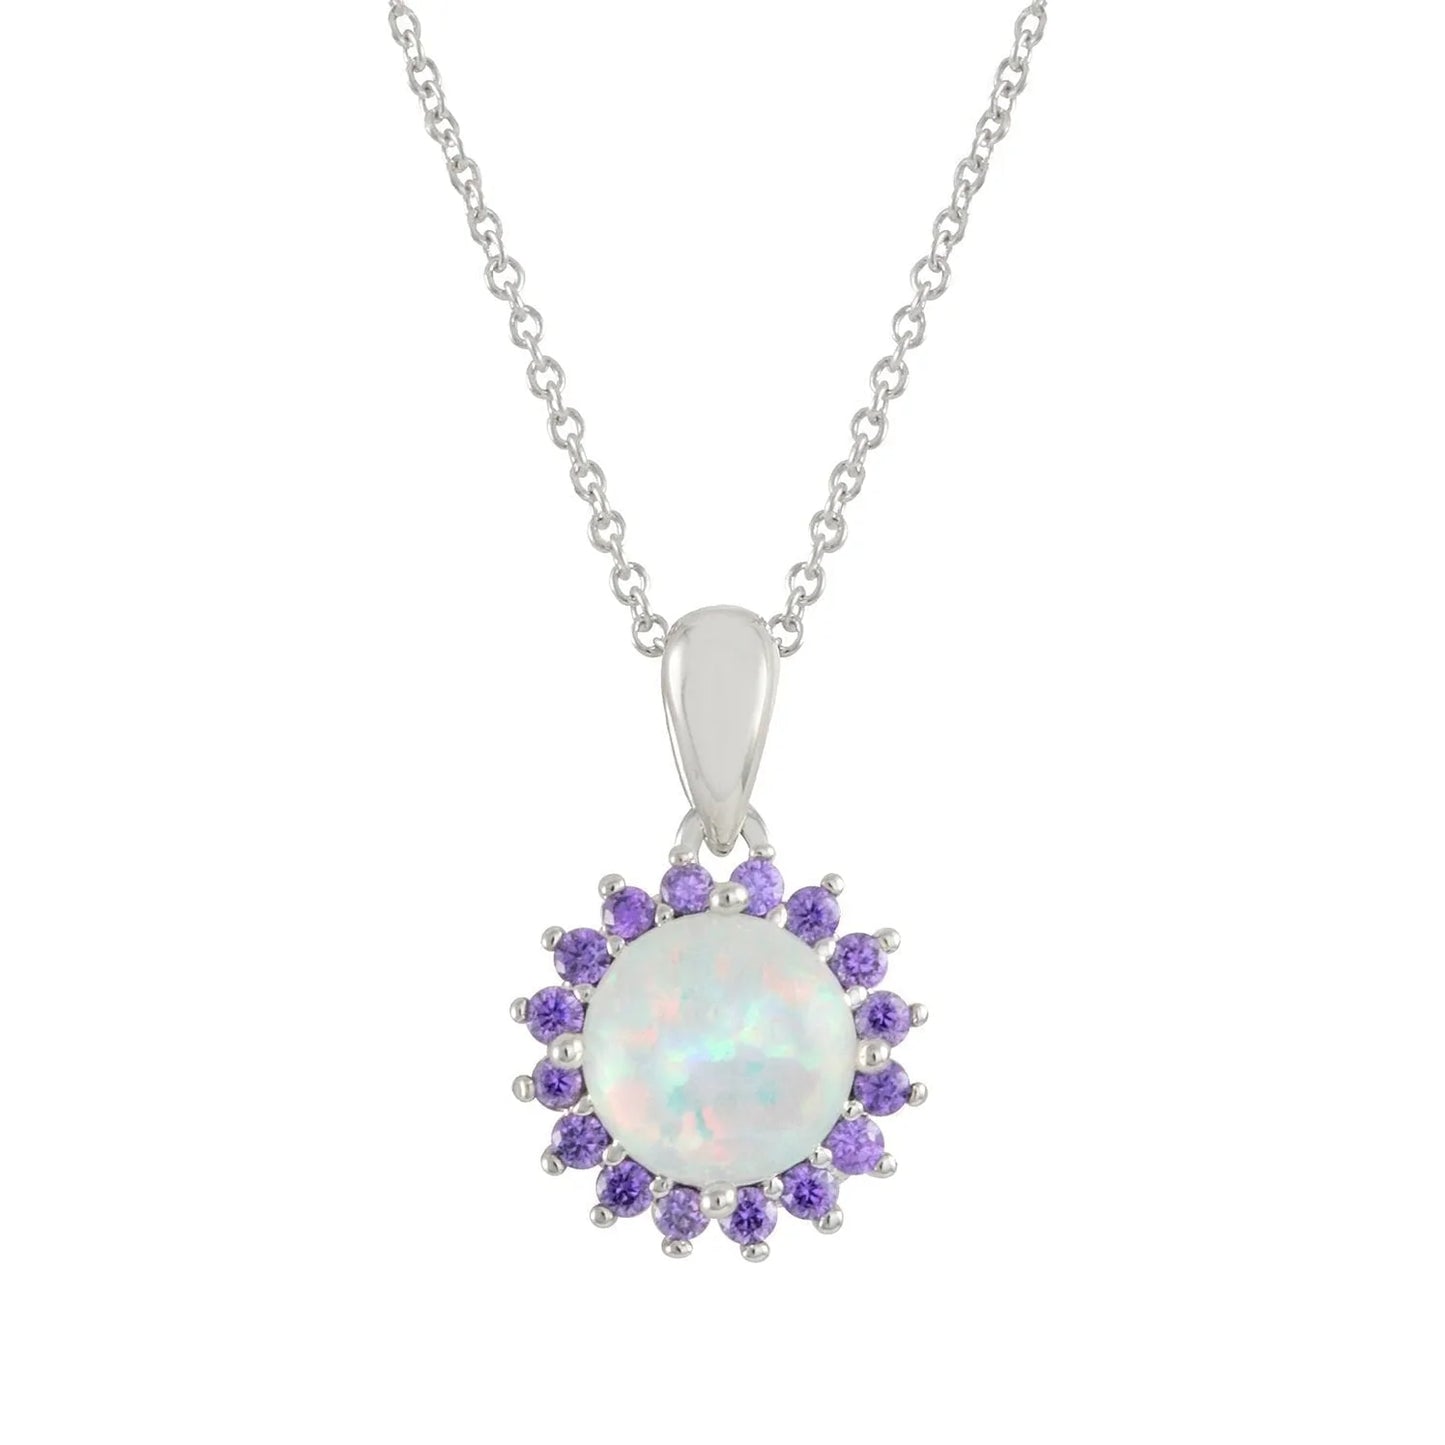 Beatrix CZ Amethyst and Opal Pendant Necklace, Silver